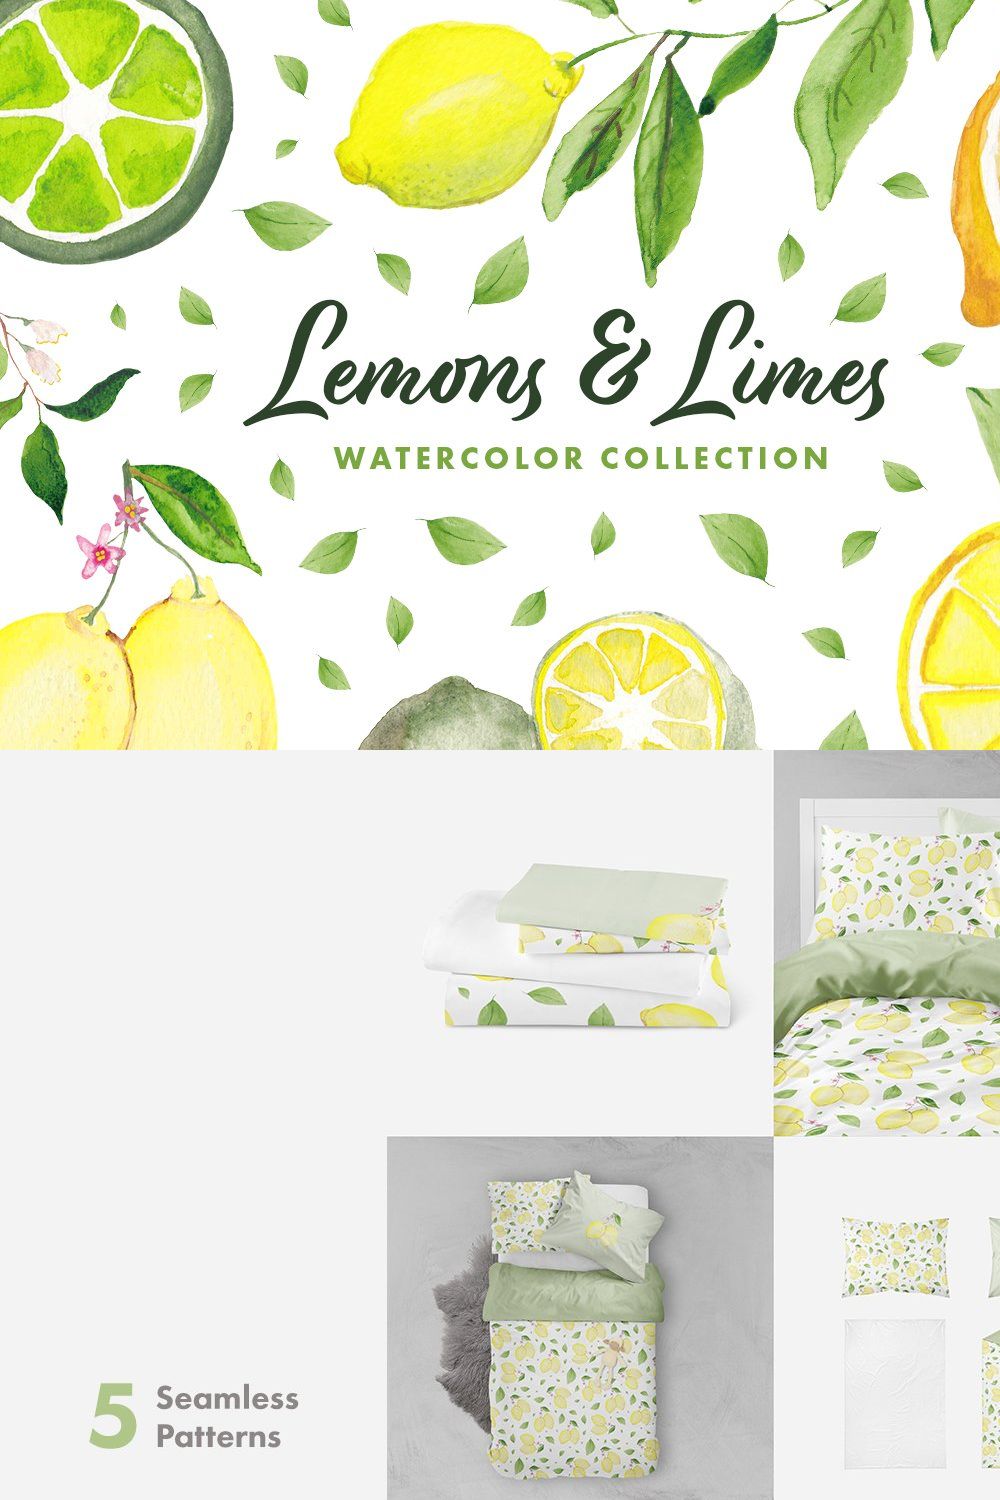 Lemons & Limes Watercolor Collection pinterest preview image.